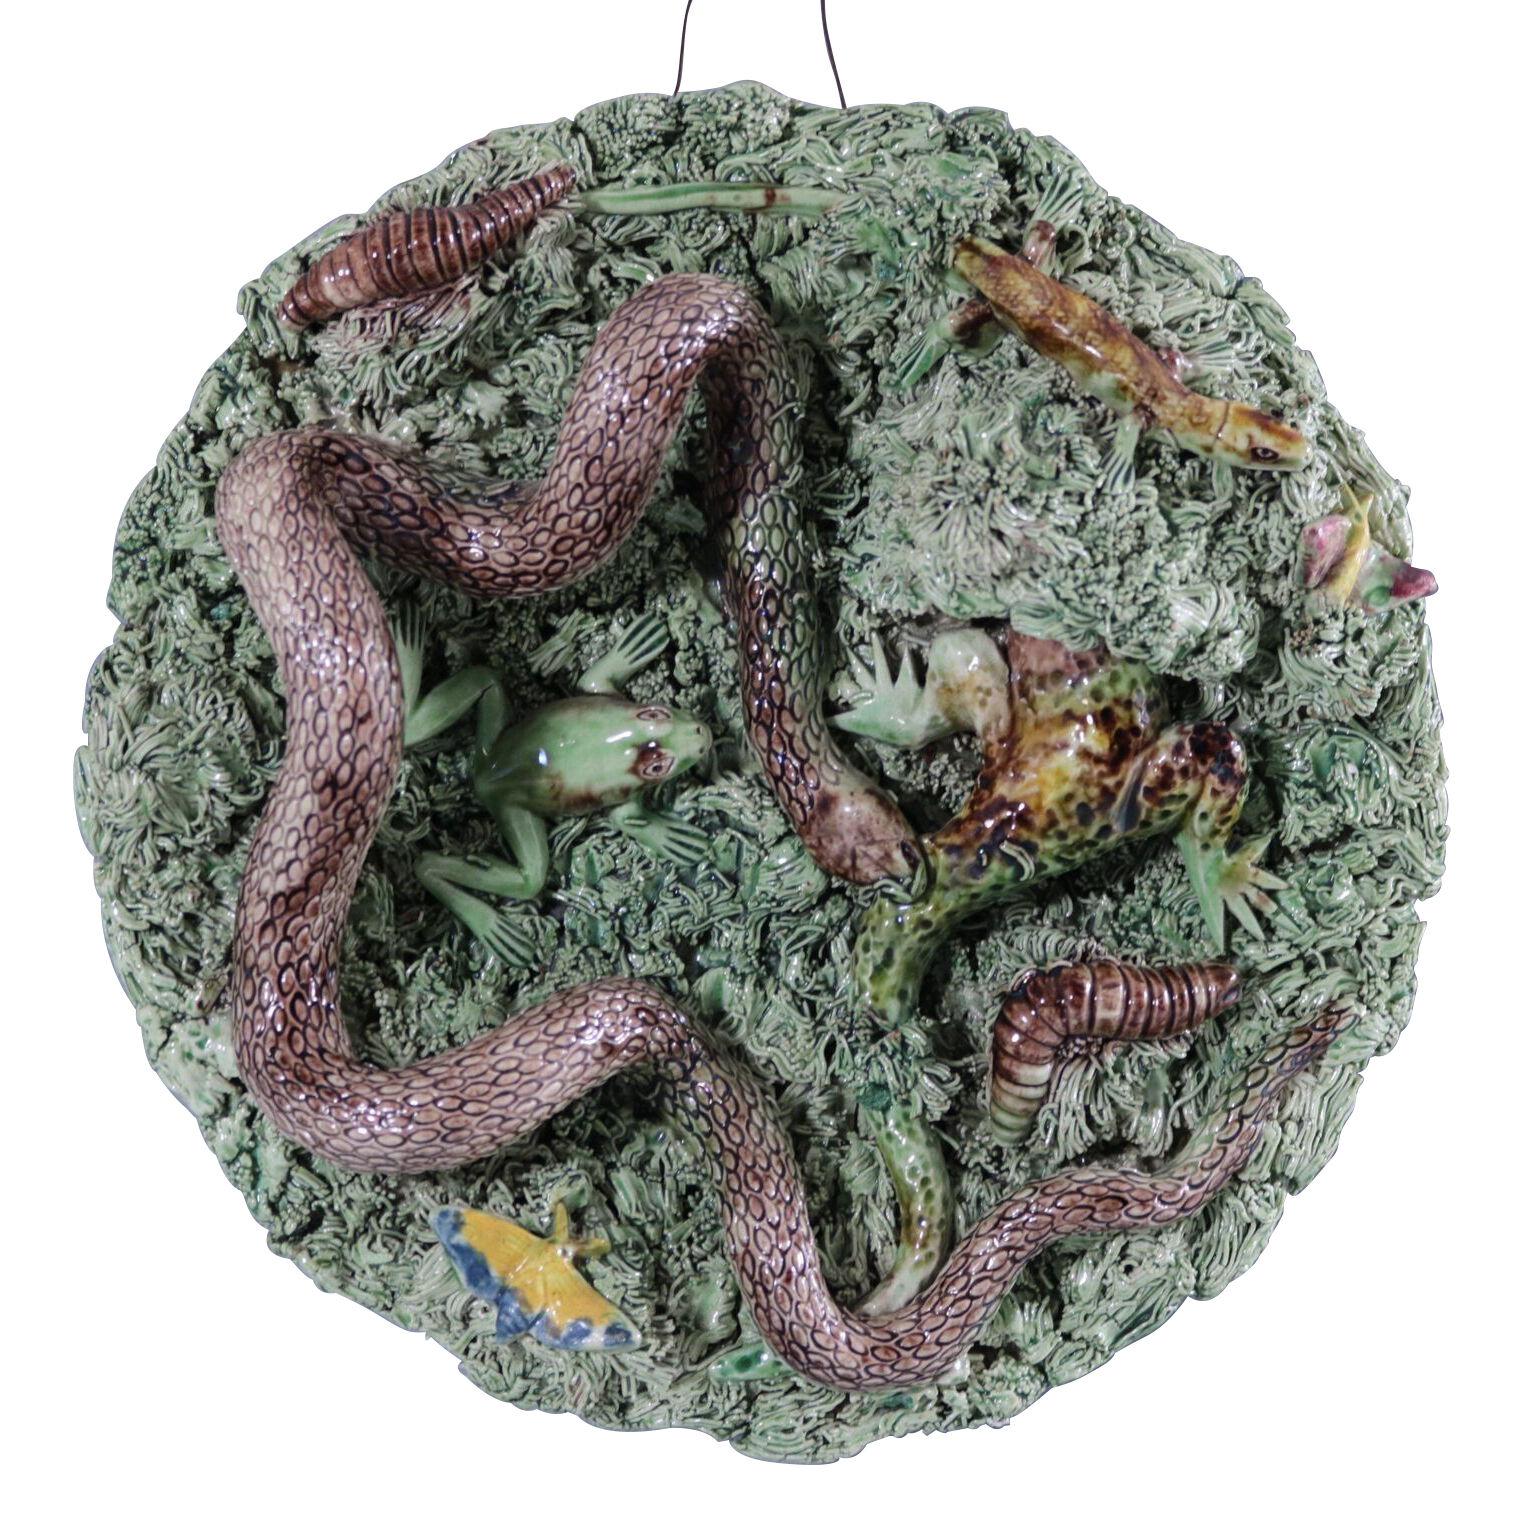 Cuhna Palissy Majolica Lizard and Snake Plate